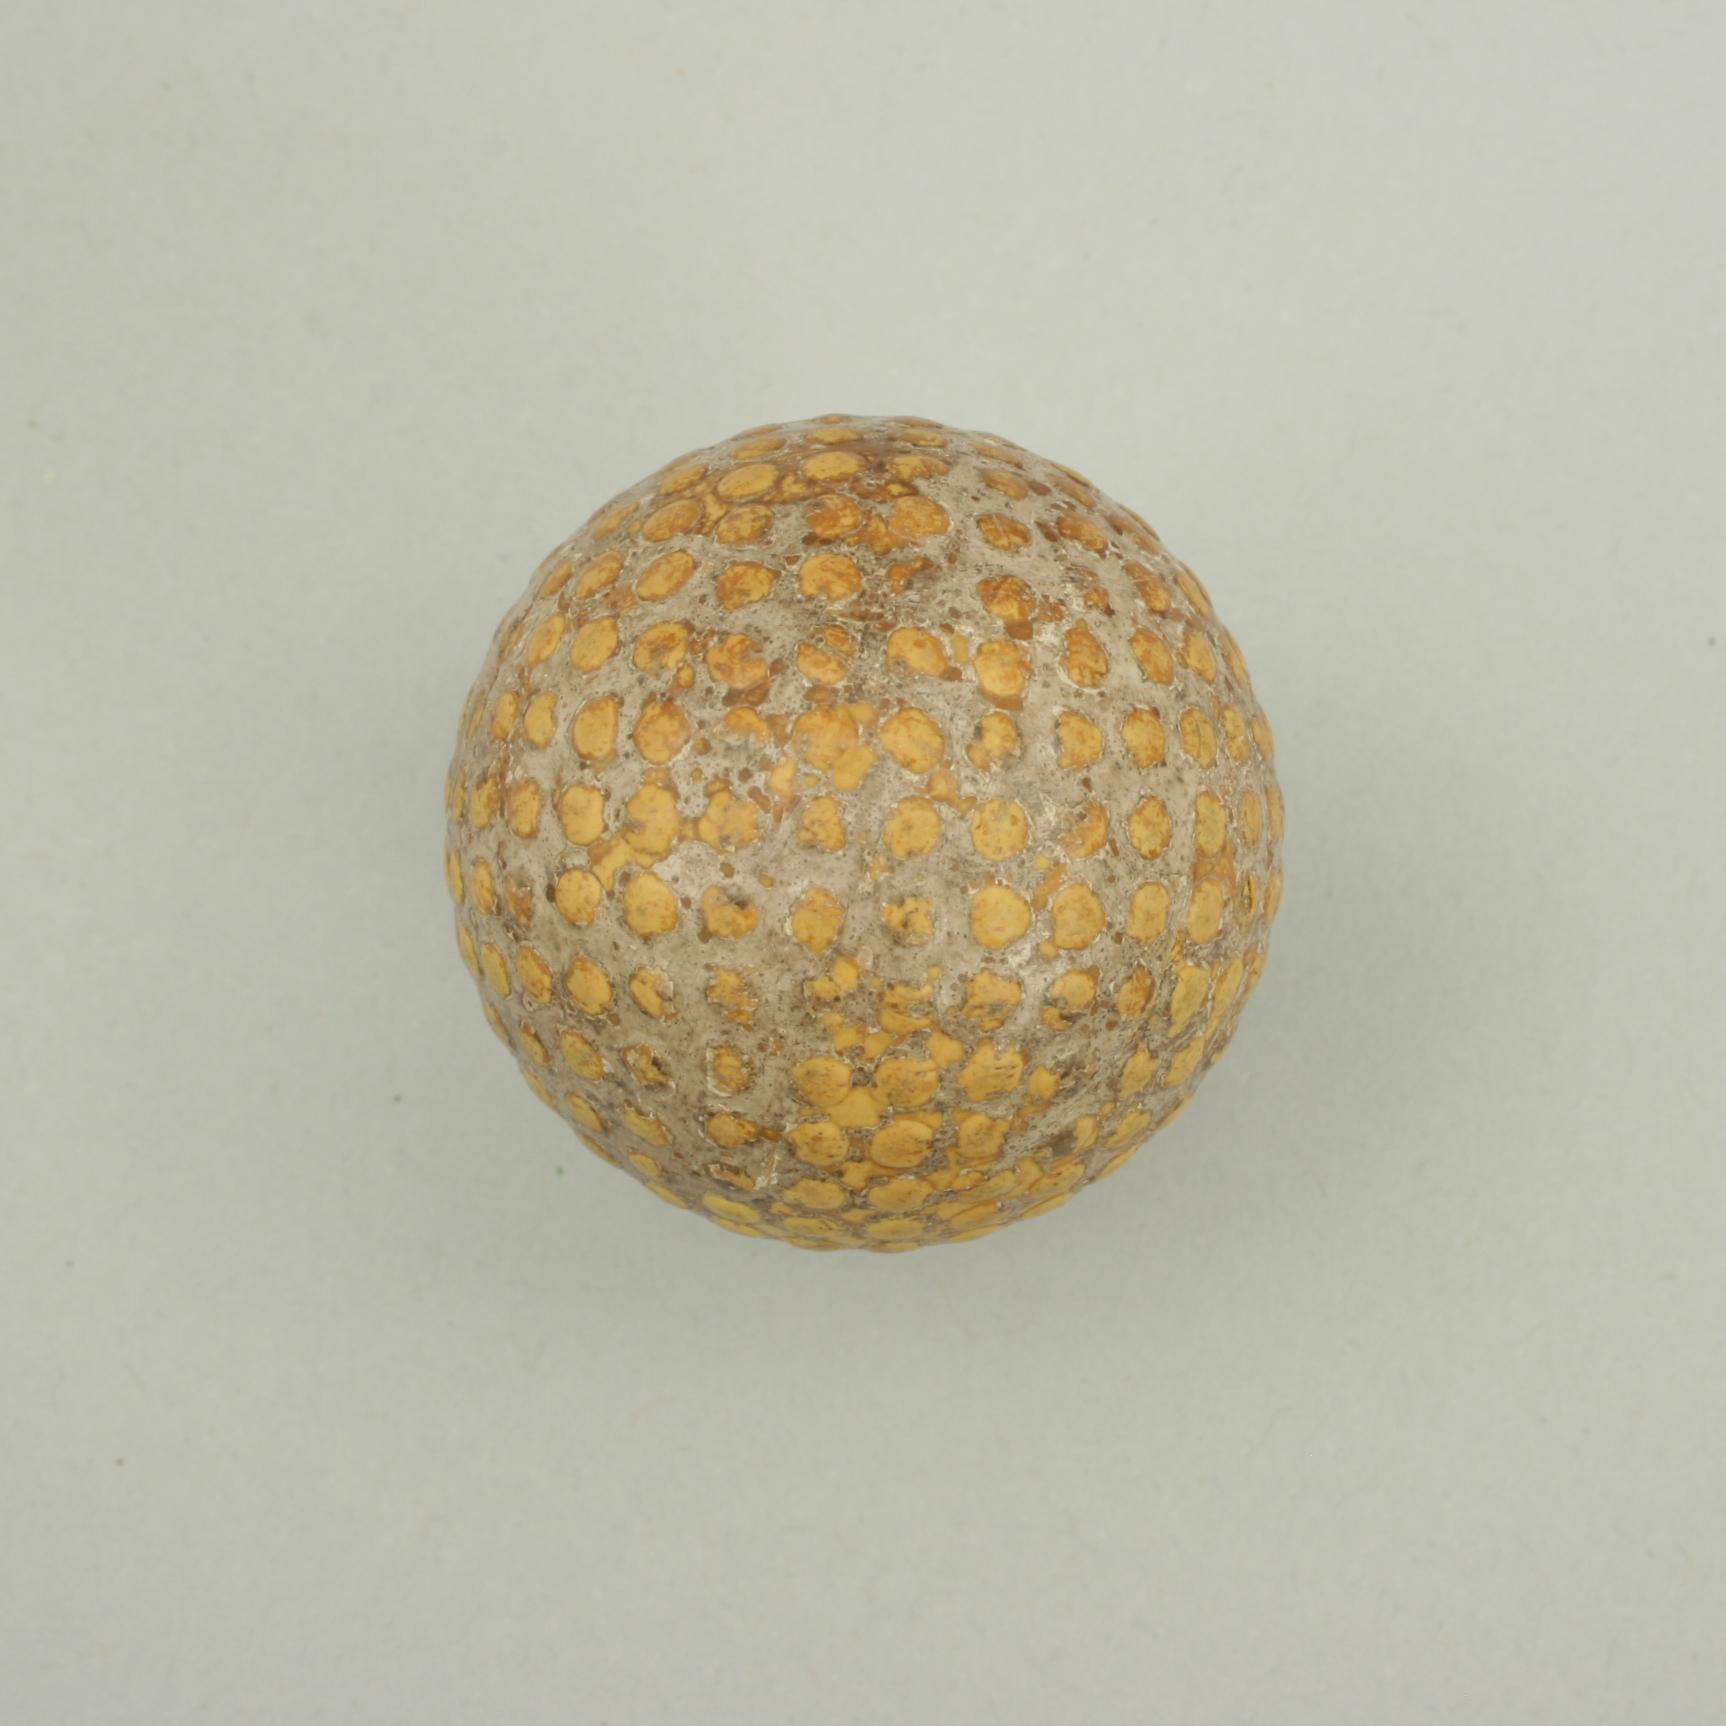 Bramble golf ball.
A bramble patterned rubber core golf ball. The ball is with out name and no makers details, circa 1900's. The ball pattern is made up of raised dimples, there is a crack in its surface.
The ball is approximately 1 5/8 inch in